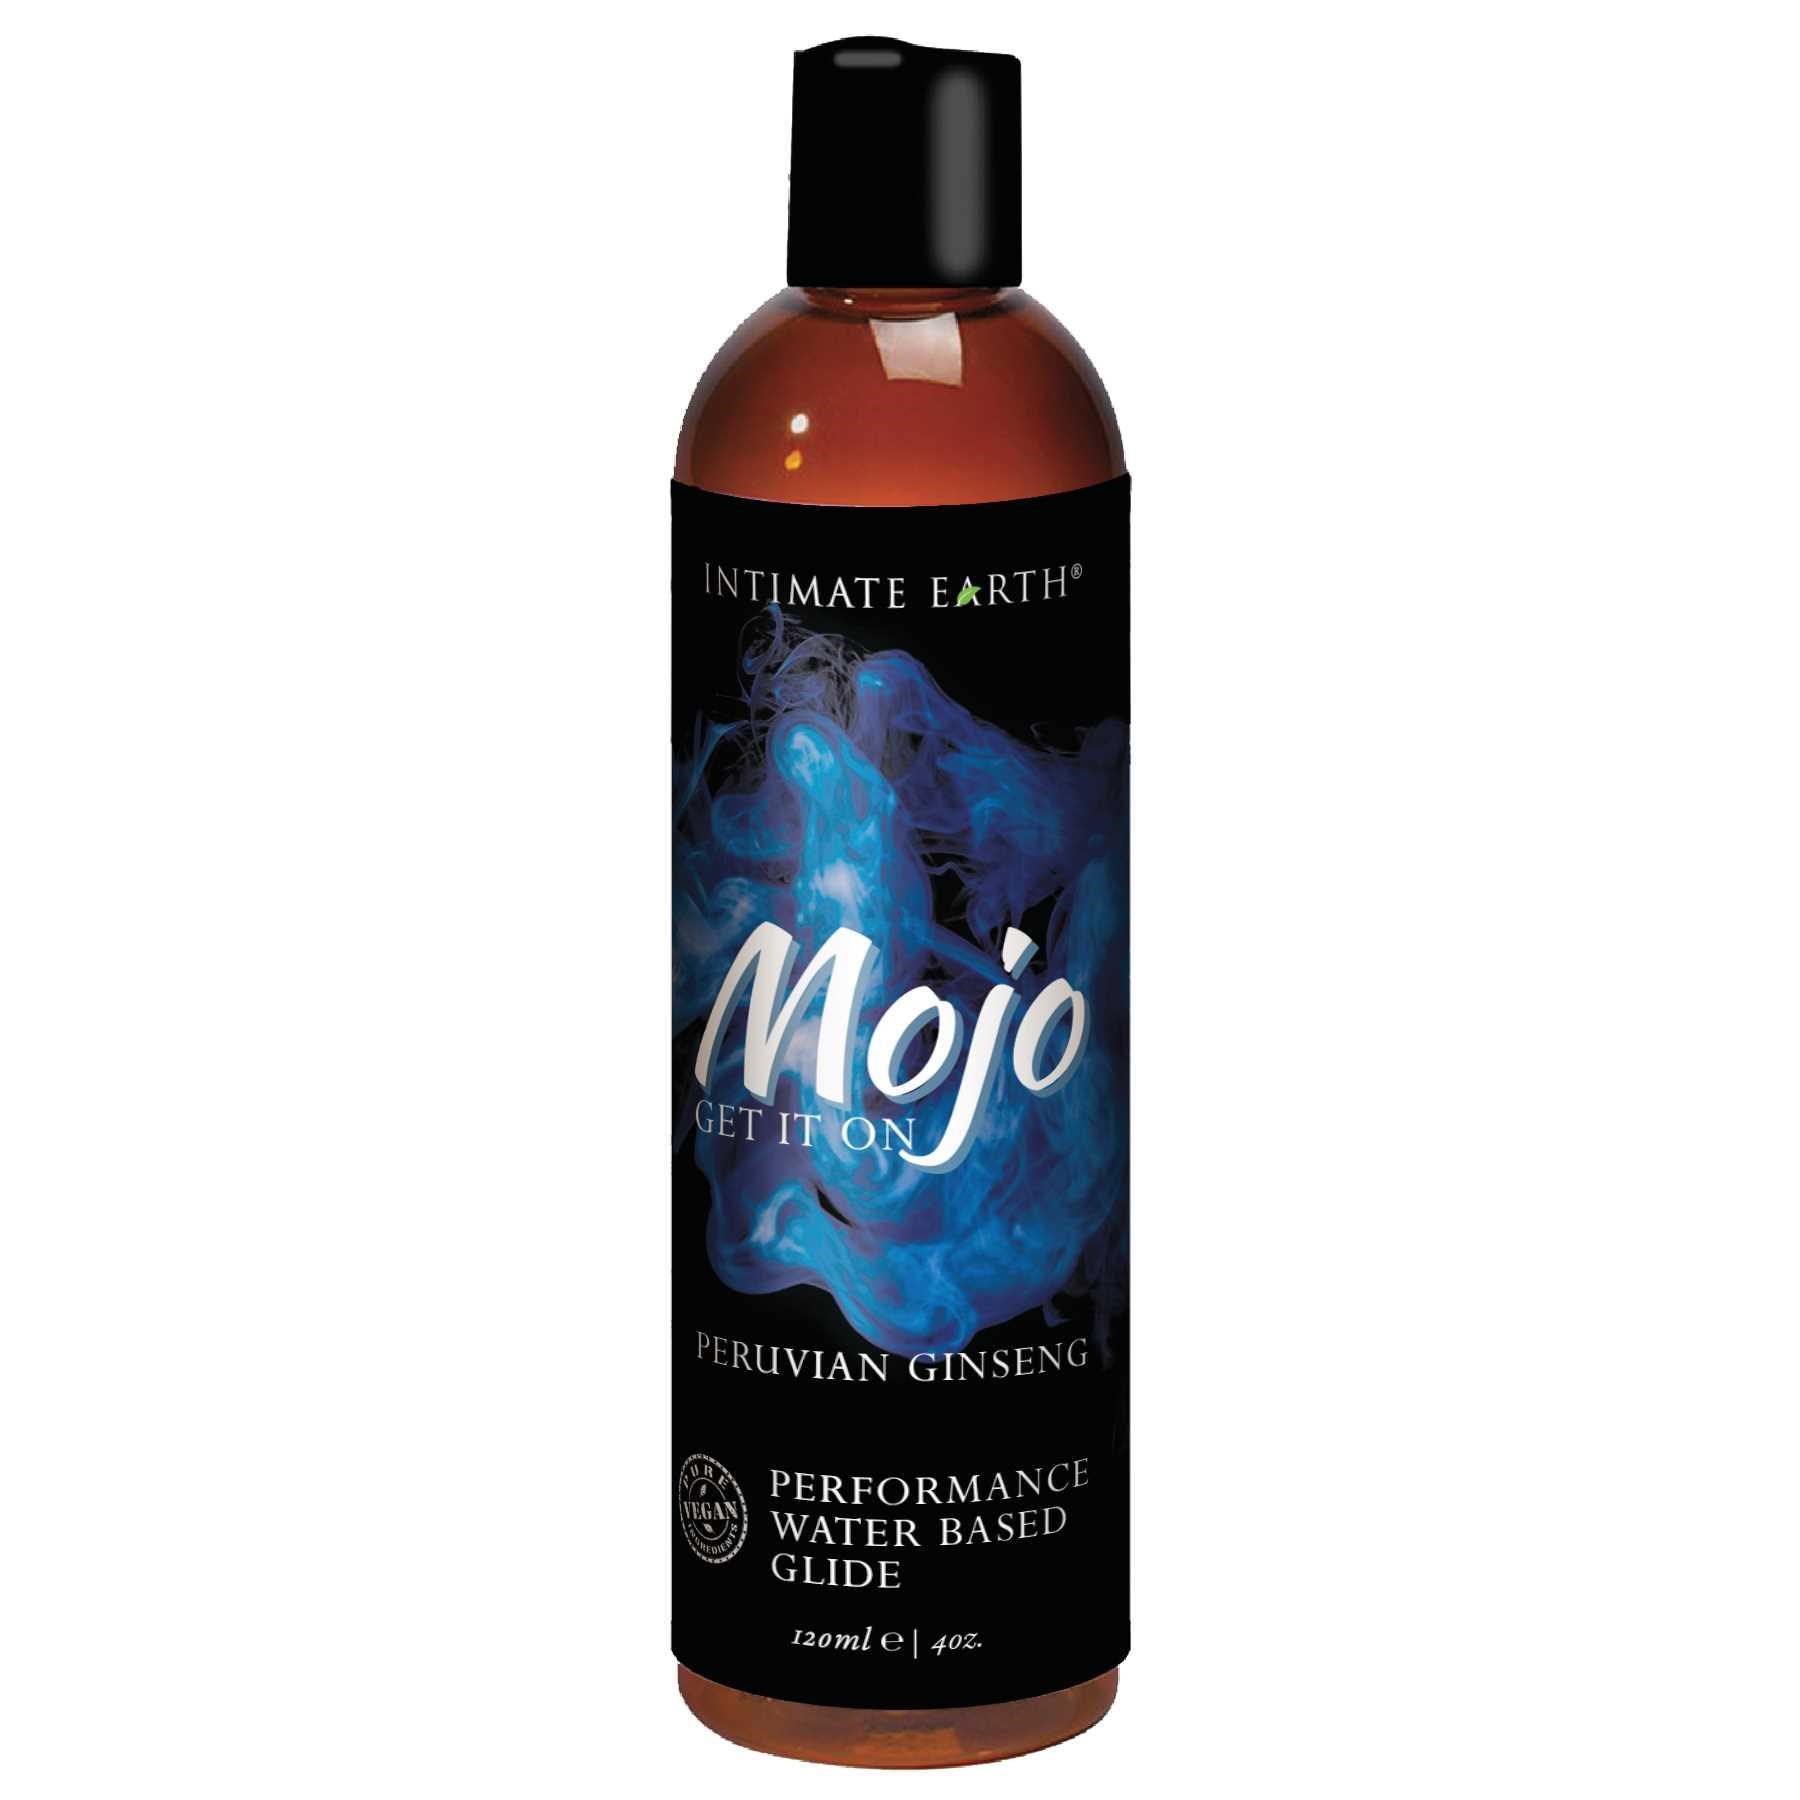 INTIMATE EARTH MOJO NATURAL WATER BASED PERFORMANCE GLIDE